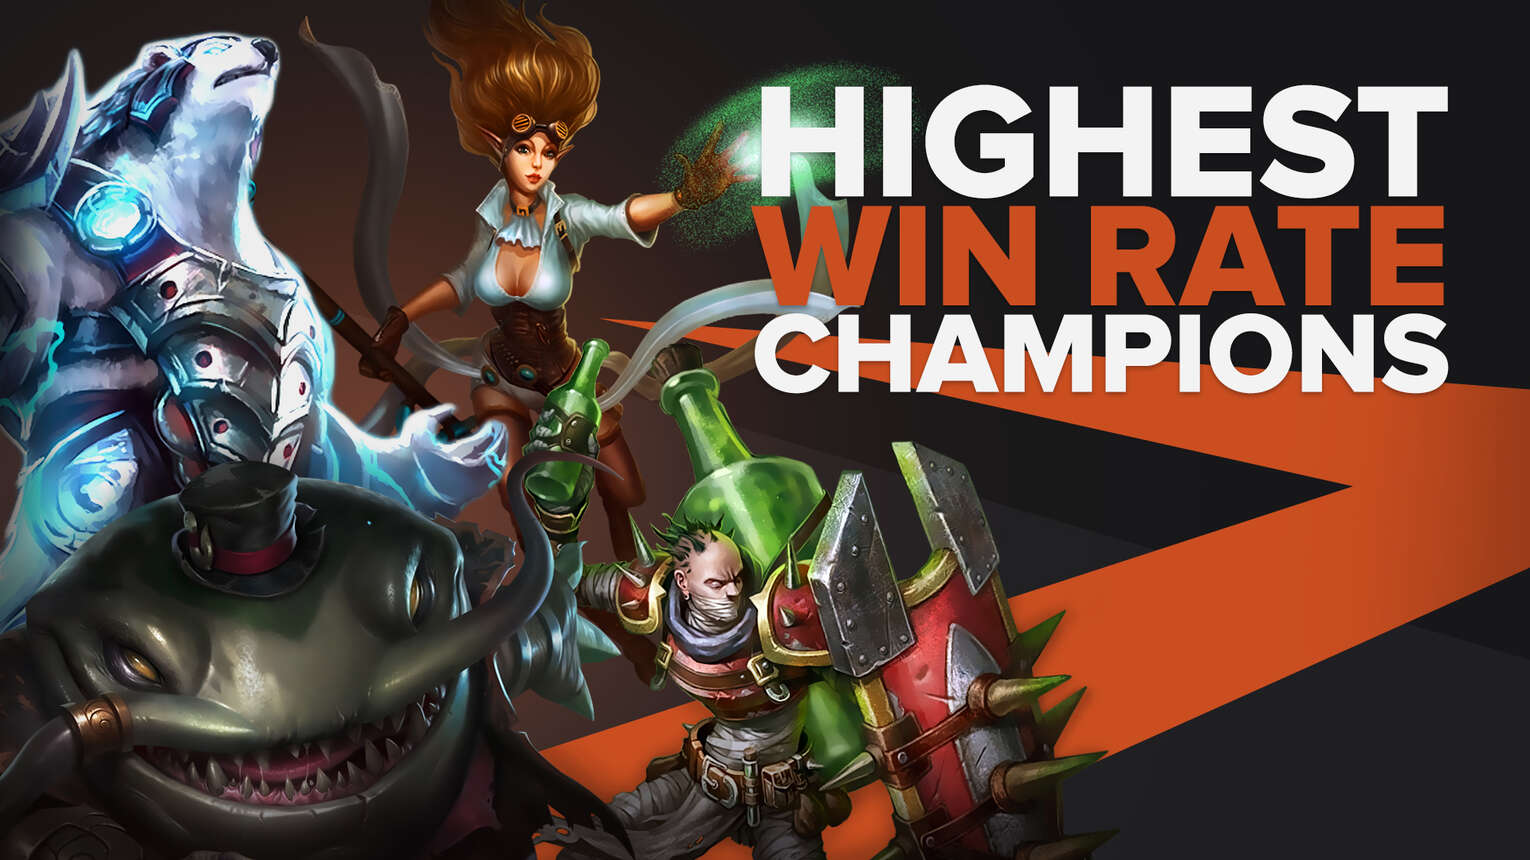 THIS CHAMPION HAS THE HIGHEST WIN RATE IN PATCH 12.10! (BUT WHO IS